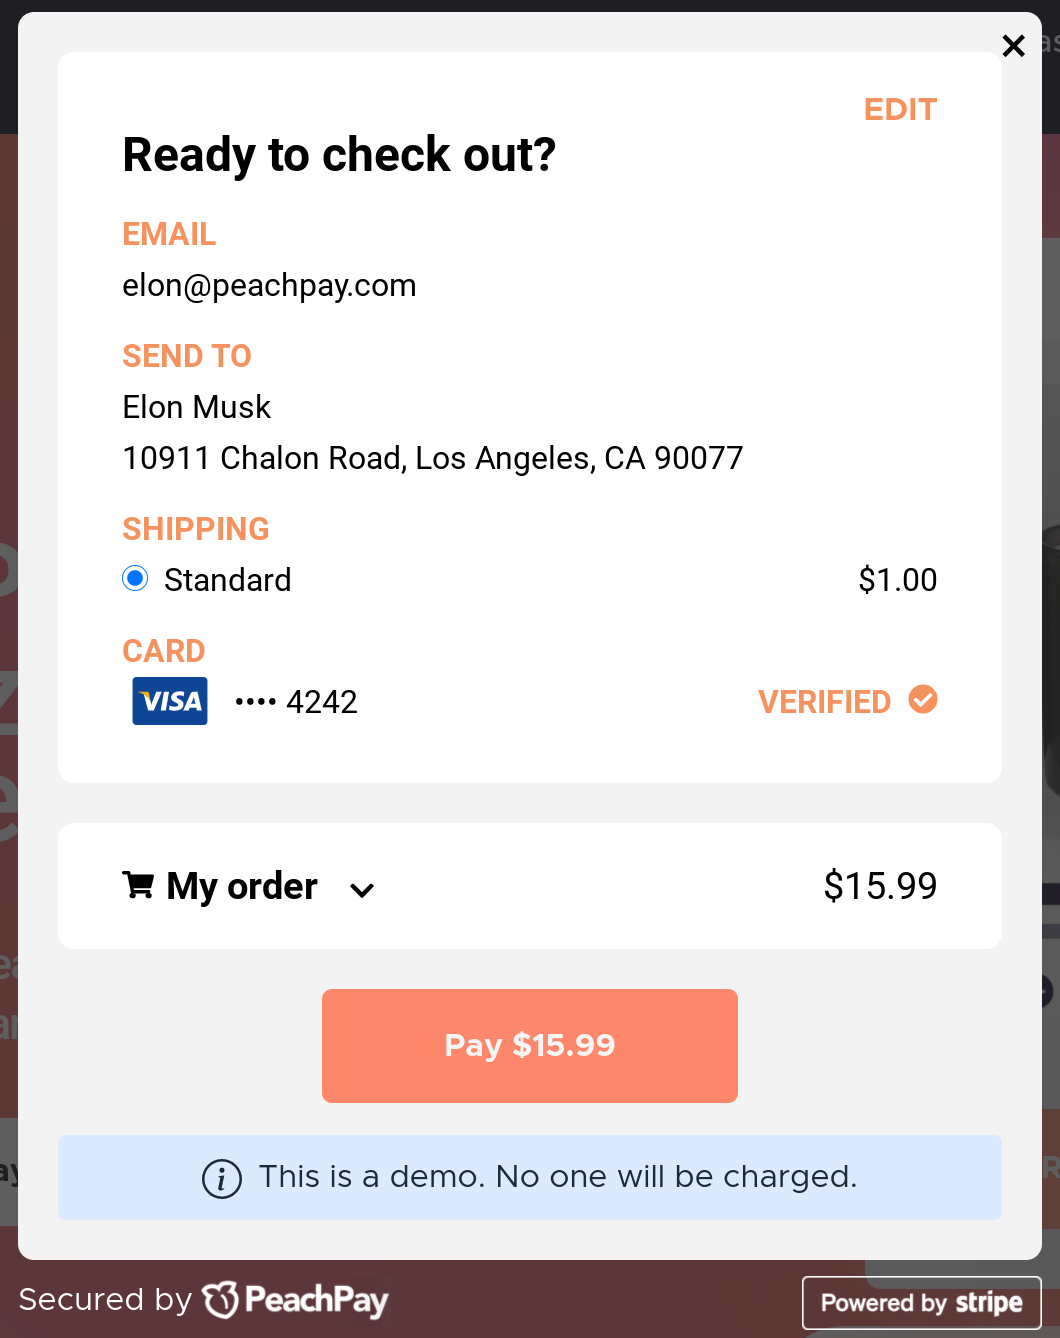 PeachPay's Amazon-like one-click checkout option with PeachPay